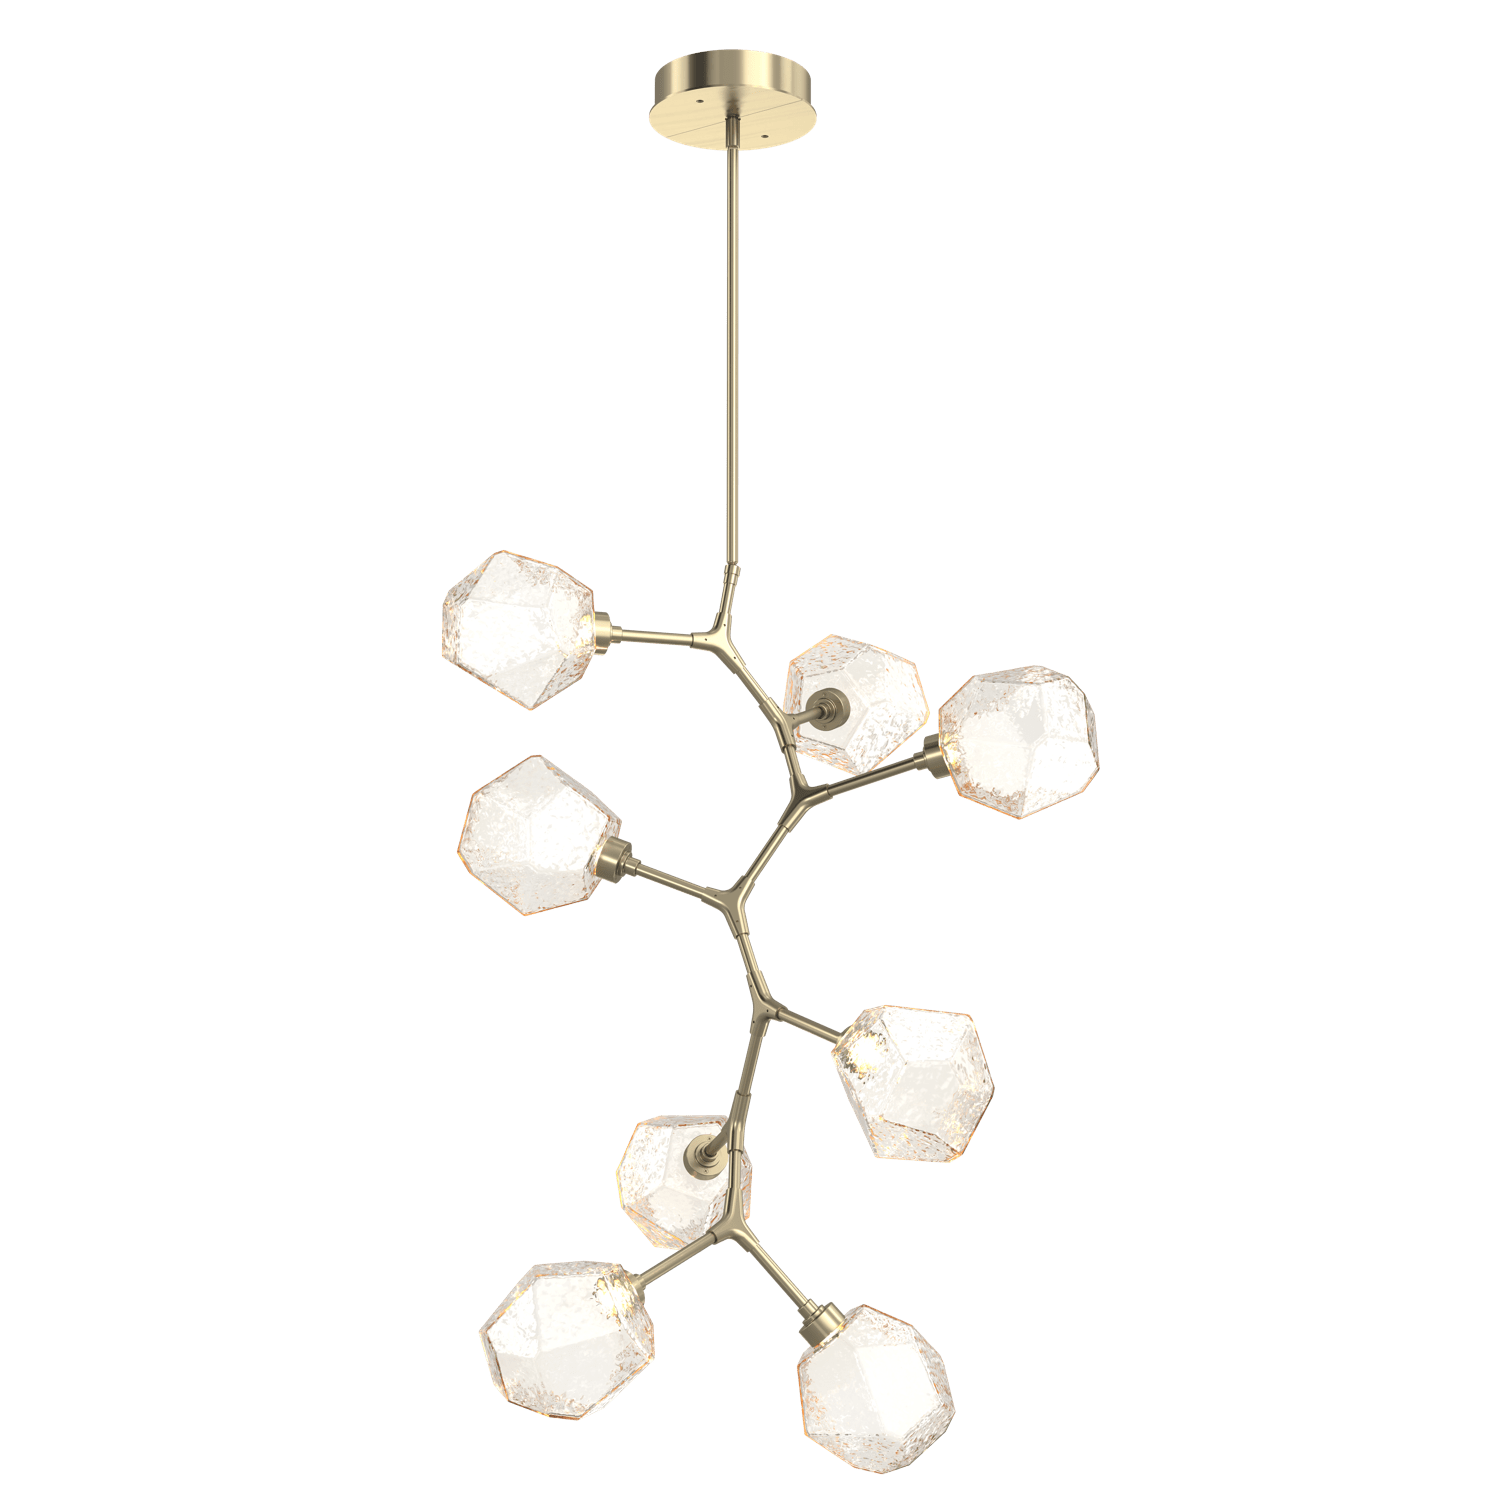 CHB0039-VB-HB-A-Hammerton-Studio-Gem-8-light-modern-vine-chandelier-with-heritage-brass-finish-and-amber-blown-glass-shades-and-LED-lamping